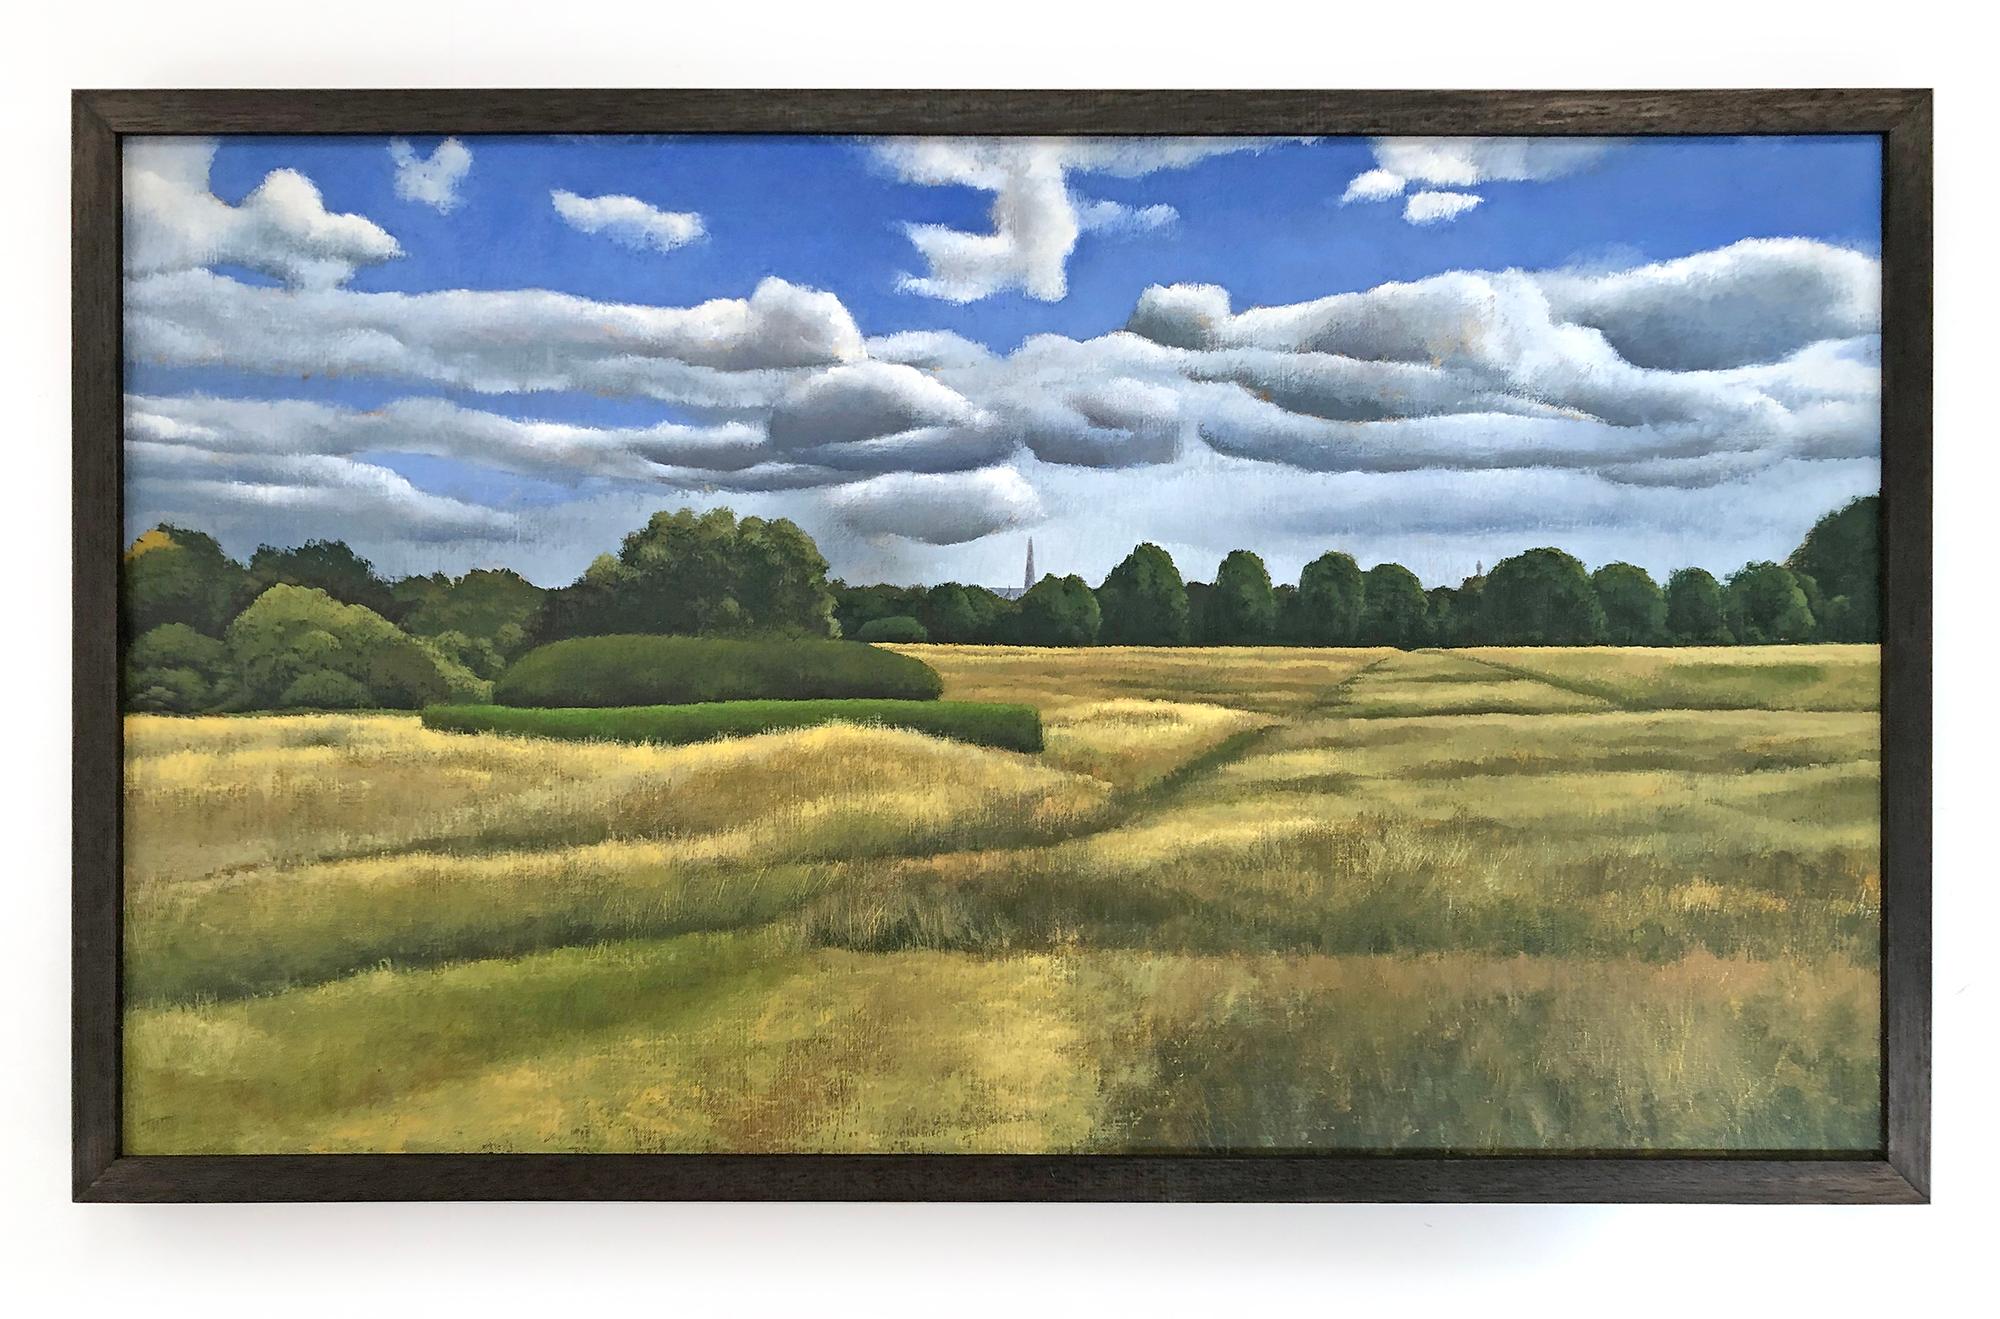 A view of Hampstead Heath in mid summer with The Shard in the distance
Artist Tim Woodcock-Jones original paintings are available for sale with Wychwood Art. Discover new paintings for sale by Tim. Tim Woodcock-Jones was born in 1961 in London,